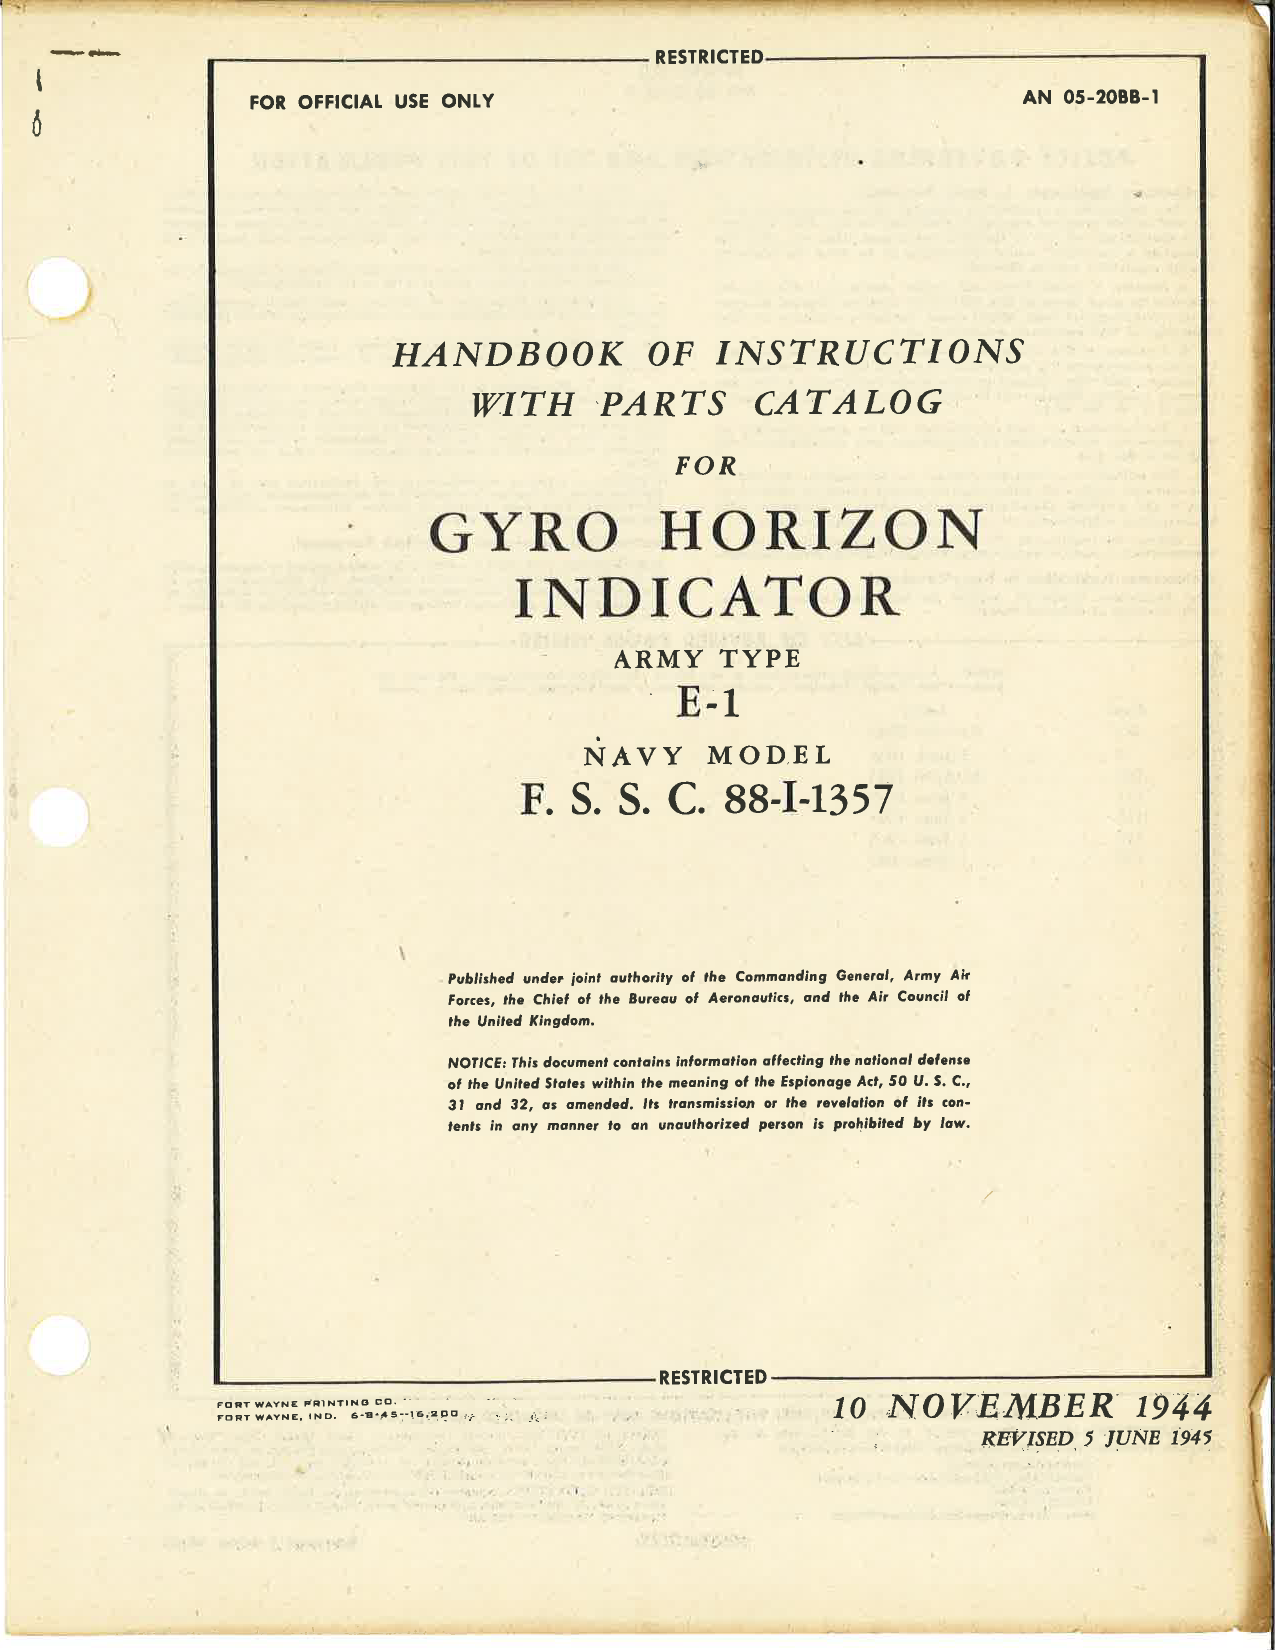 Sample page 1 from AirCorps Library document: Handbook of Instructions with Parts Catalog for Gyro Horizon Indicator Type E-1, F.S.S.C. 88-I-1357